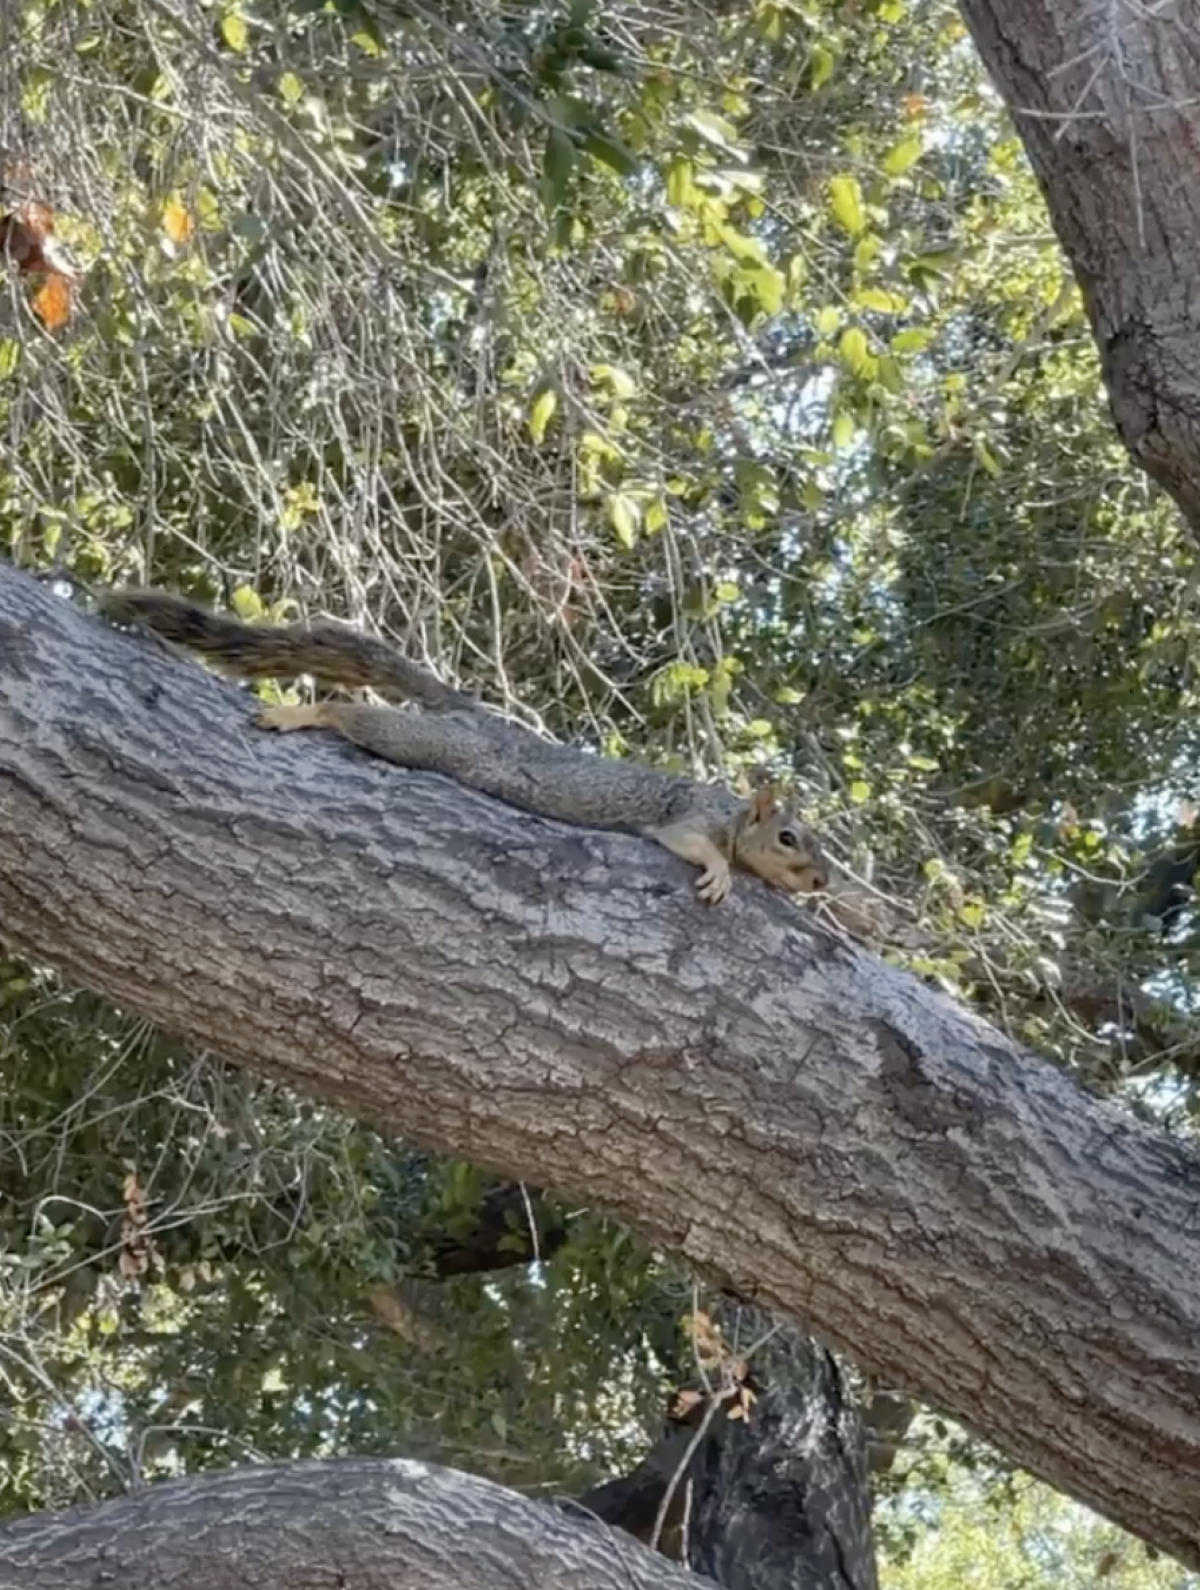 A squirrel splayed out on a tree branch